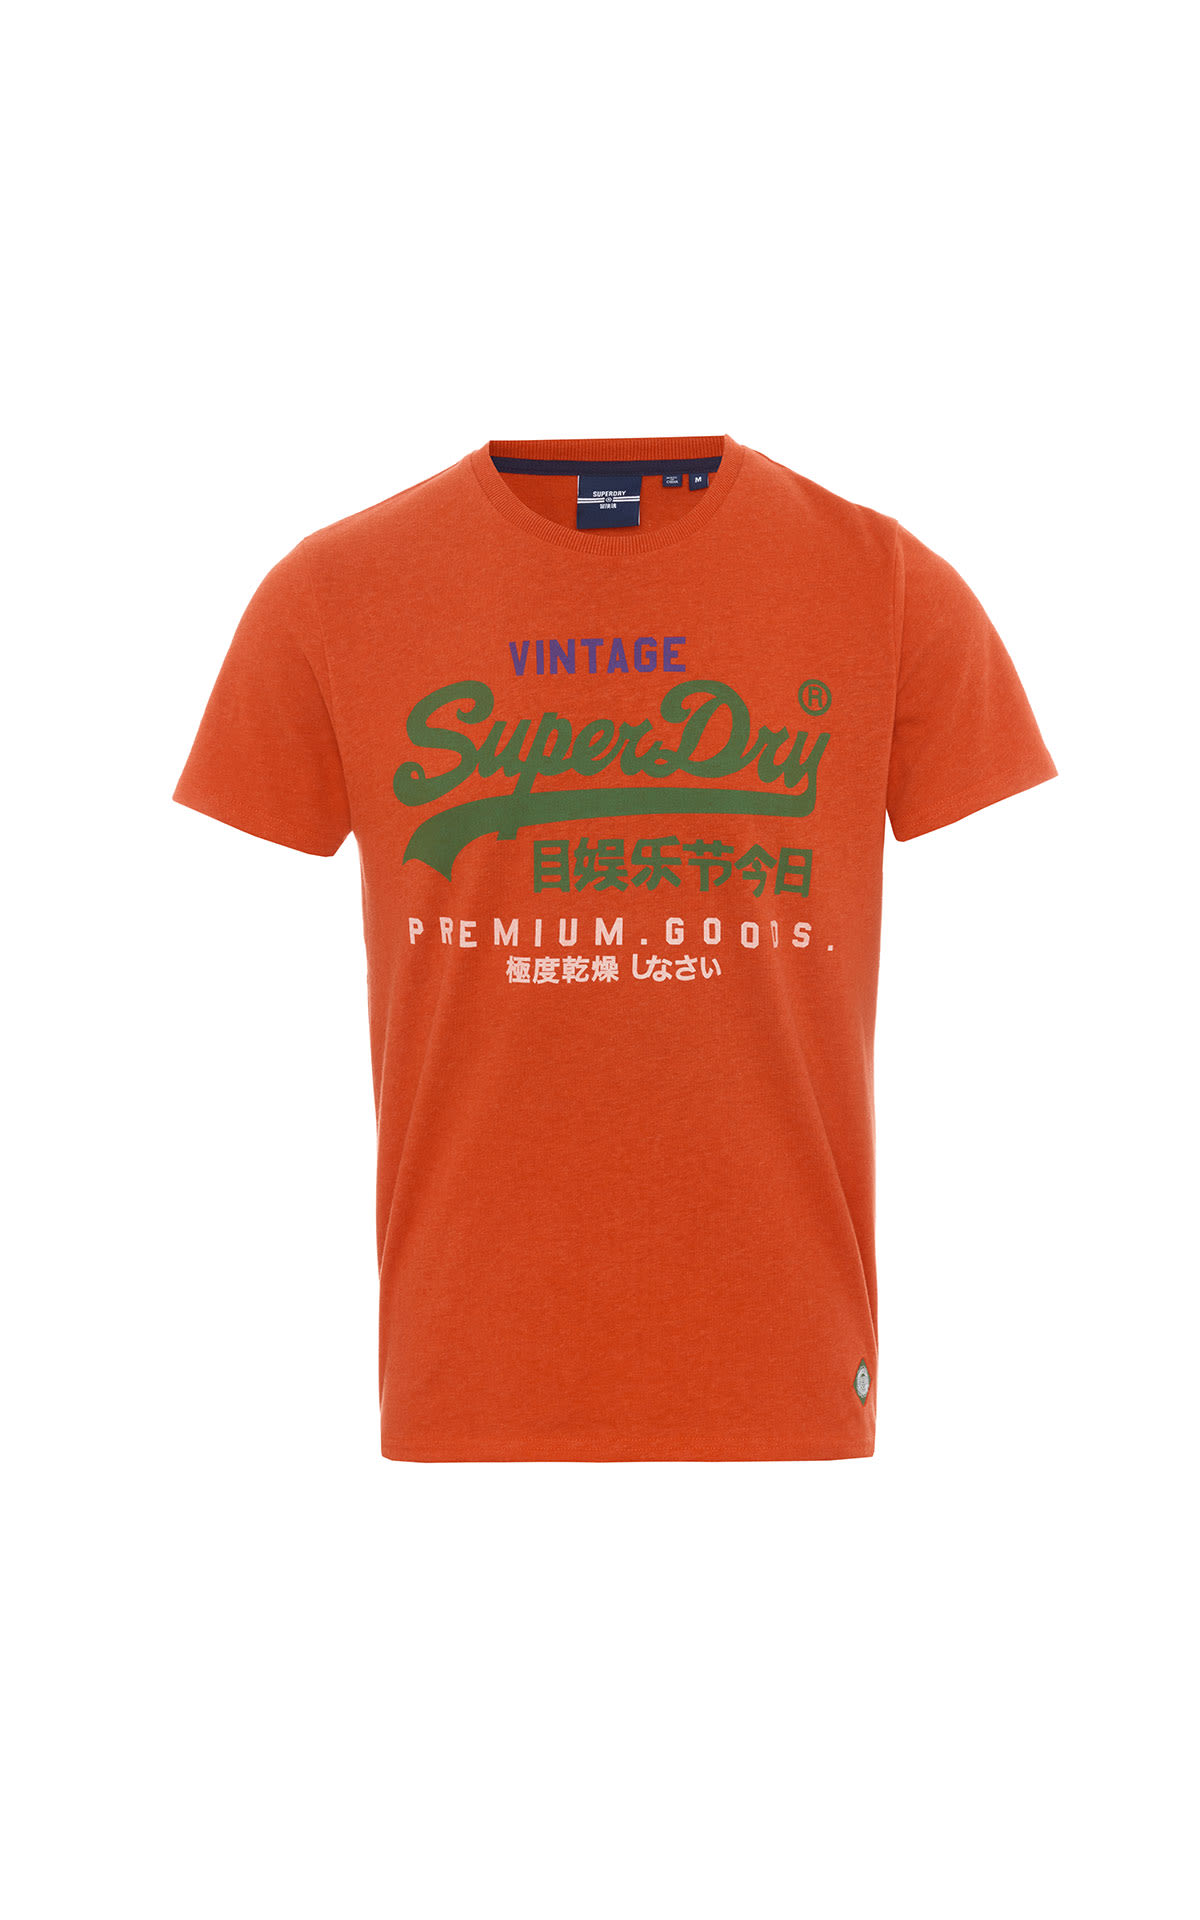 Superdry Workwear graphic t-shirt from Bicester Village